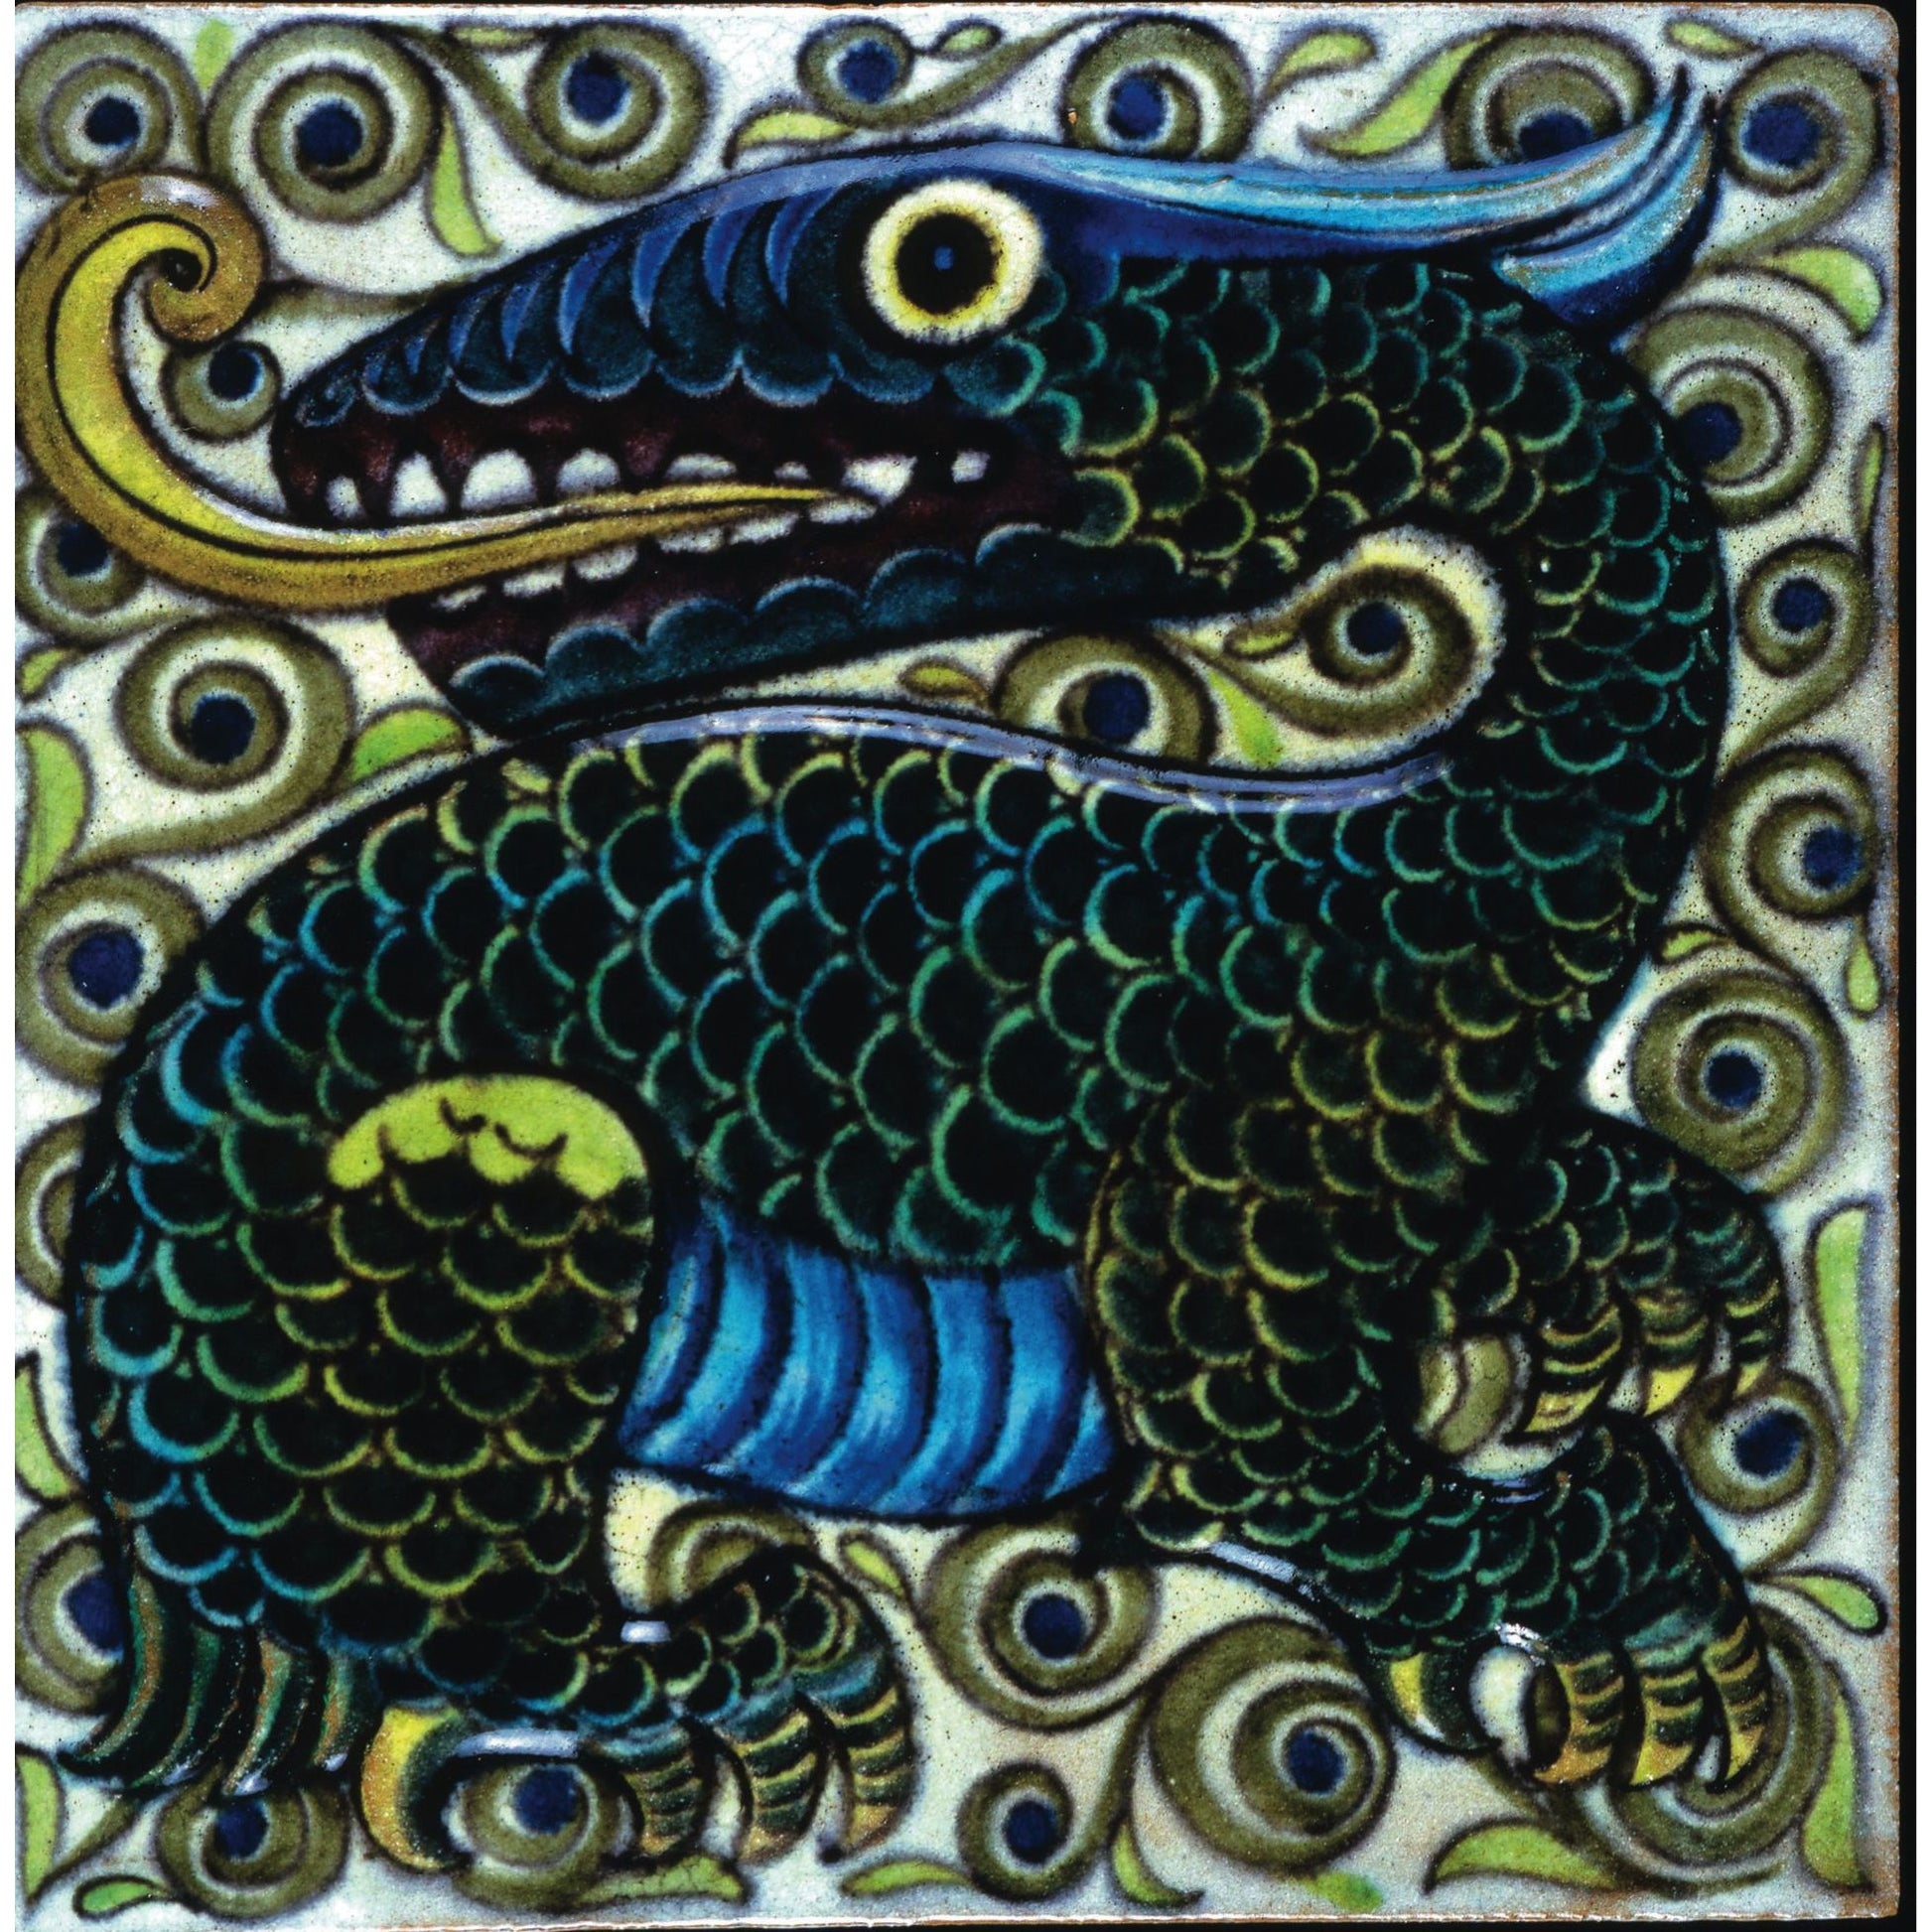 Square greeting card - dragon tile by William de Morgan. Dragon in rich blues, greens, and yellows with a backdrop of spiral motifs. From the collection of The FItzwilliam Museum, brought to you by CuratingCambridge.com